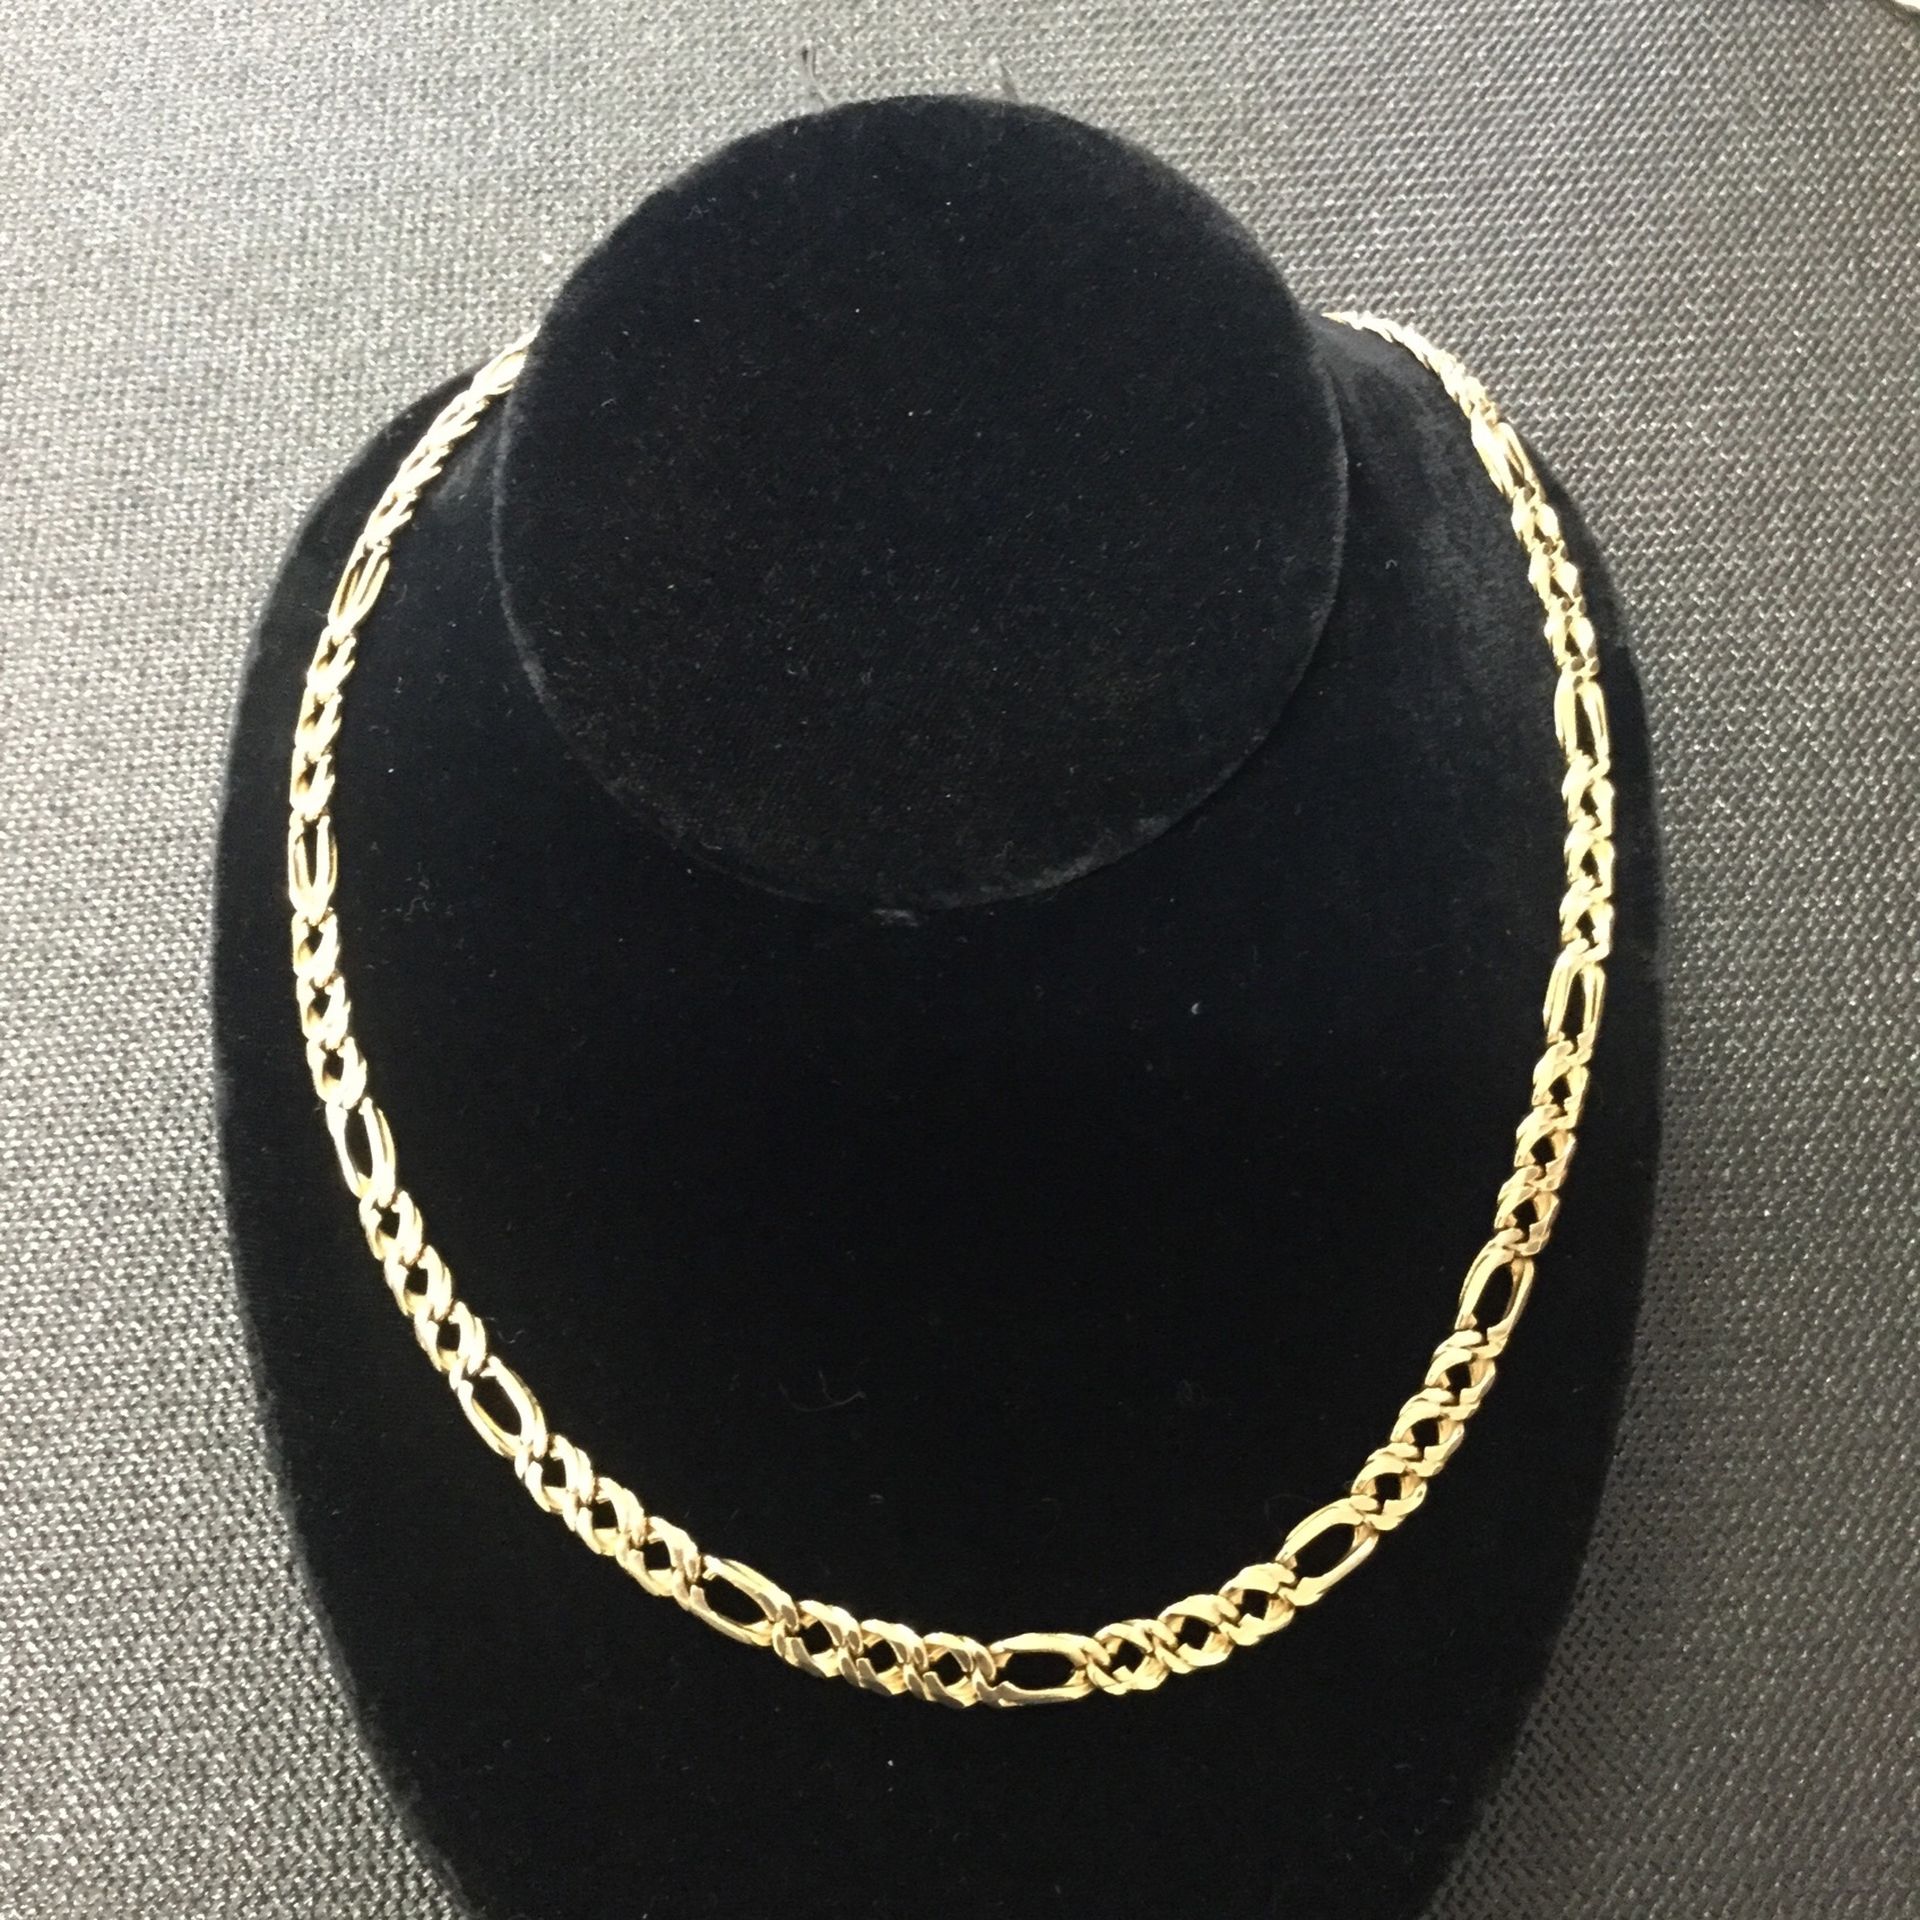 Figaro chain 20 Inch 47.3 Grams Of Gold 6.5MM Thickness 14Kt